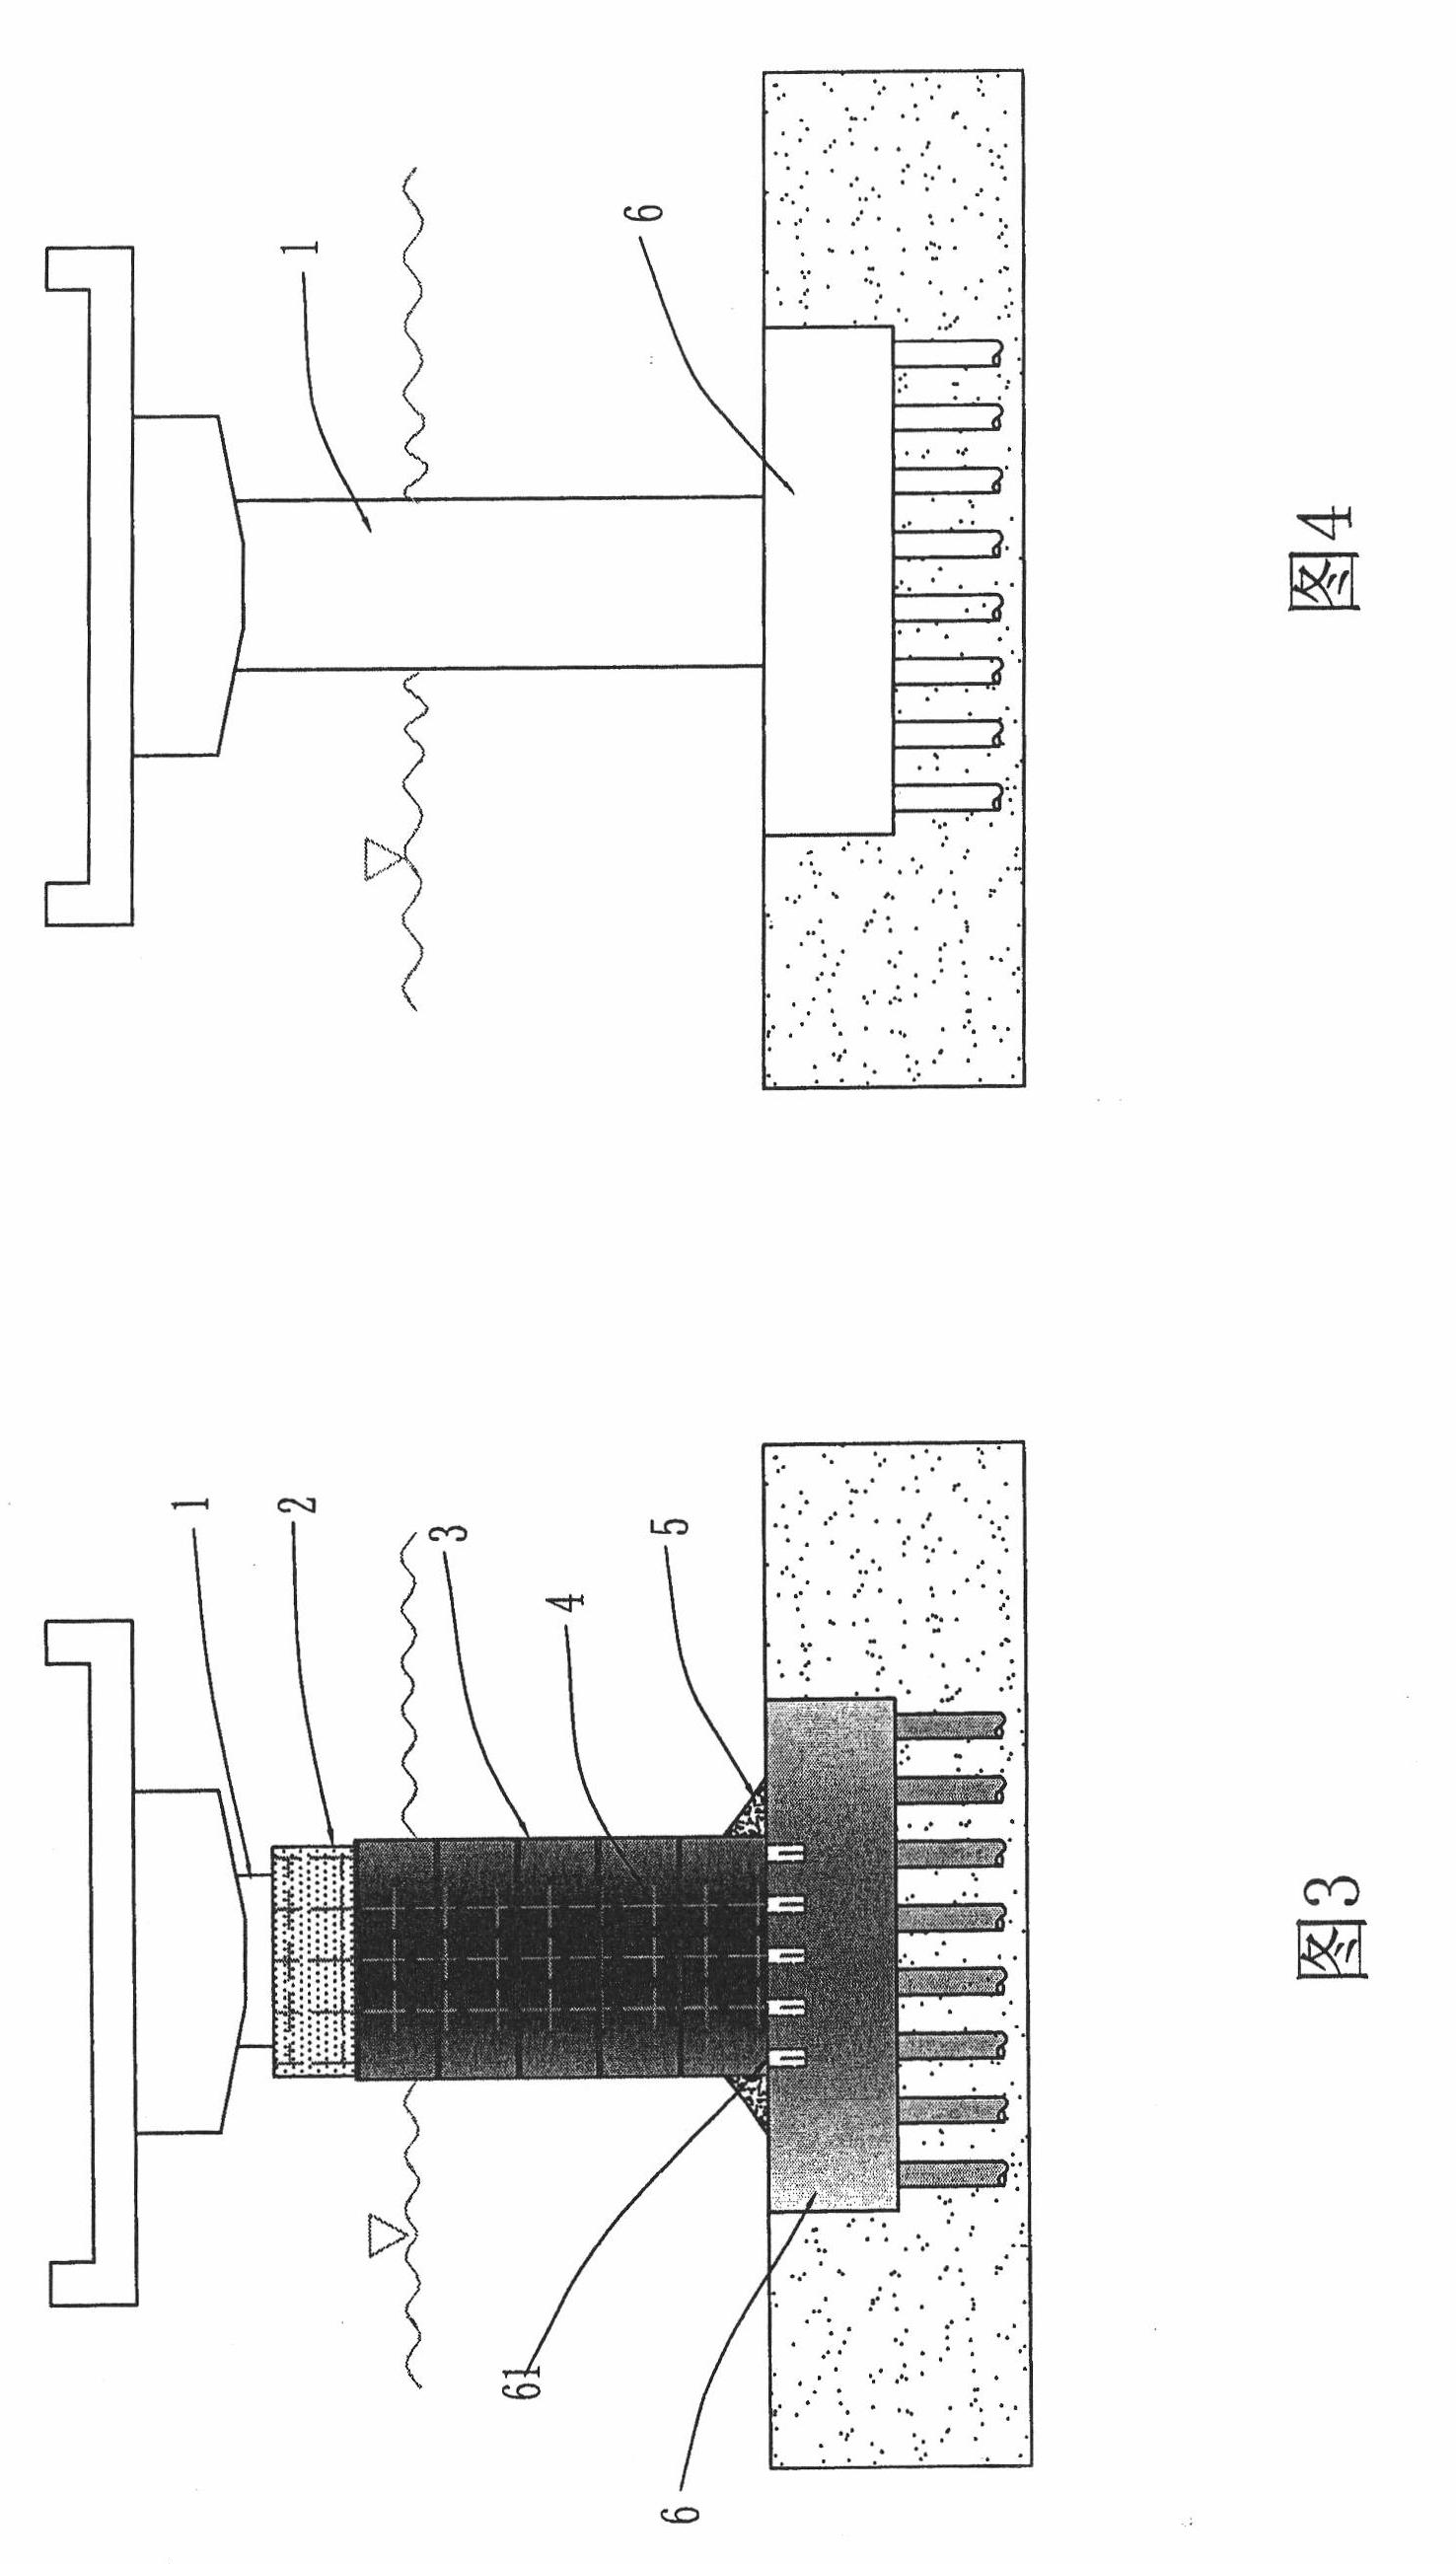 Method for reinforcing underwater structure by fiber-reinforced composite material grid ribs